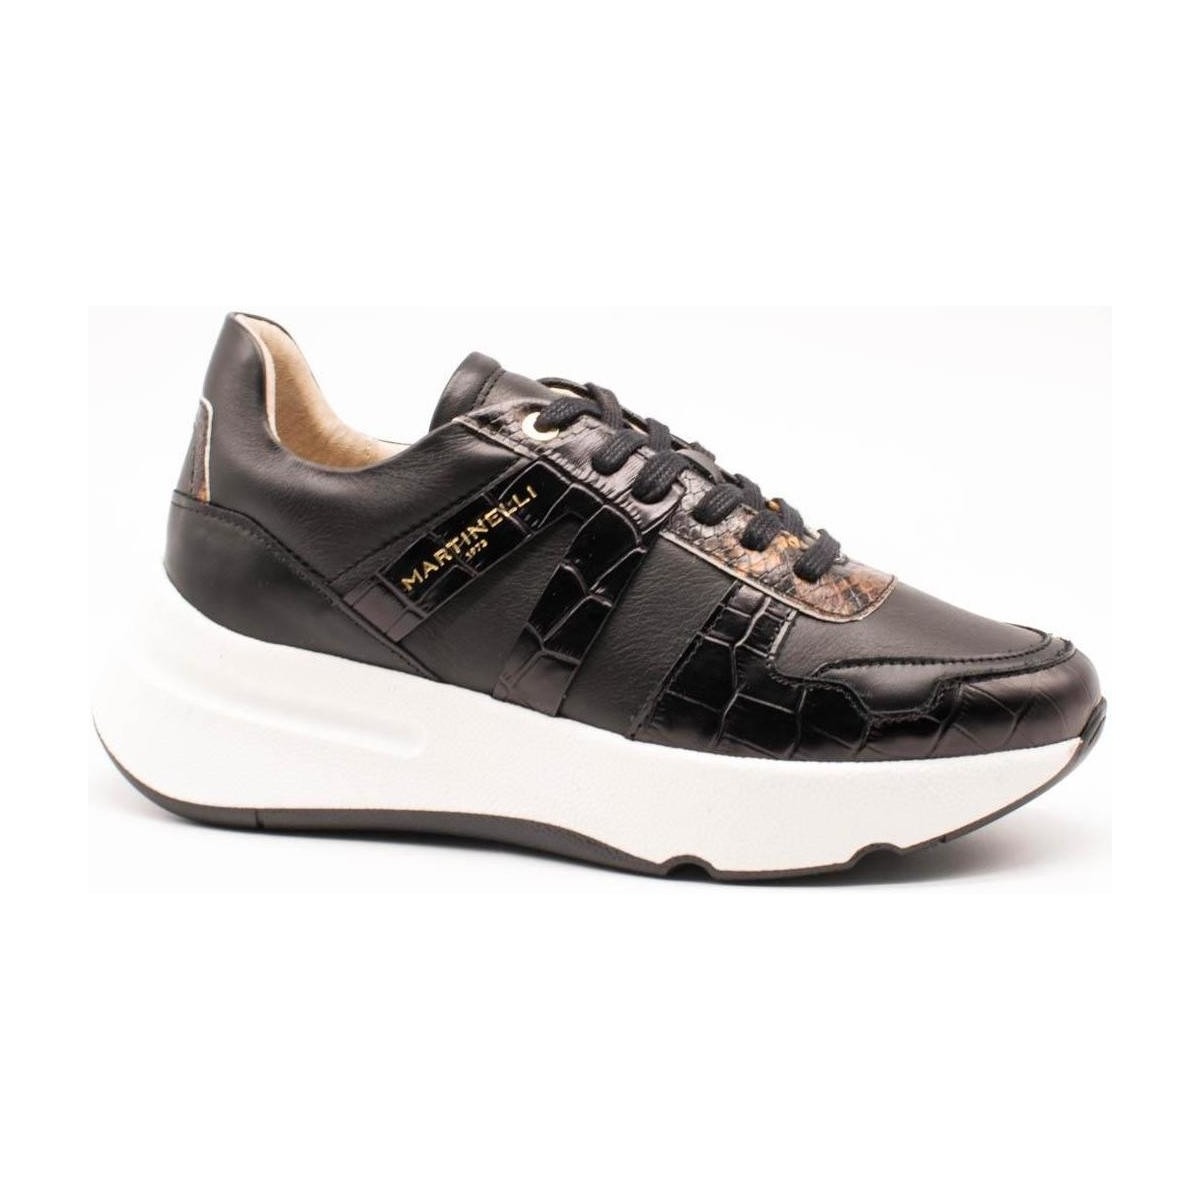 Martinelli - Womens Sneakers Black from Spartoo GOOFASH